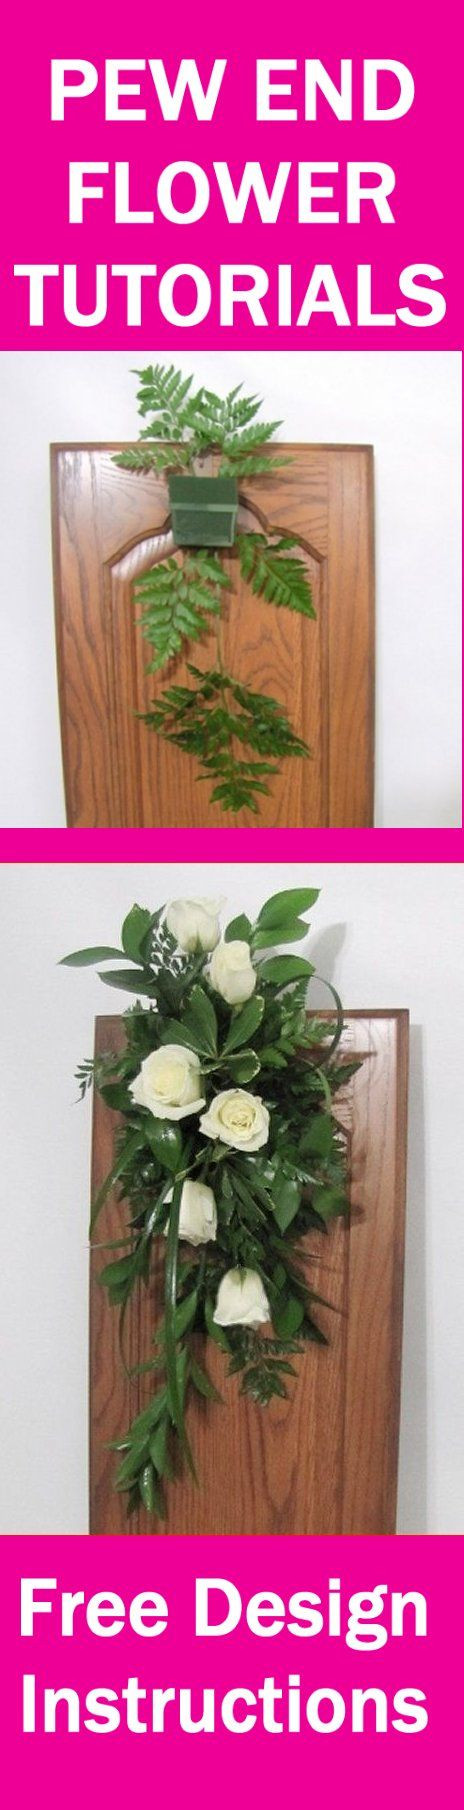 16 Perfect Proflowers Free Vase 2023 free download proflowers free vase of 568 best flowers images on pinterest floral arrangements flower within wedding pew decorations easy diy flower tutorials learn how to make bridal bouquets wedding